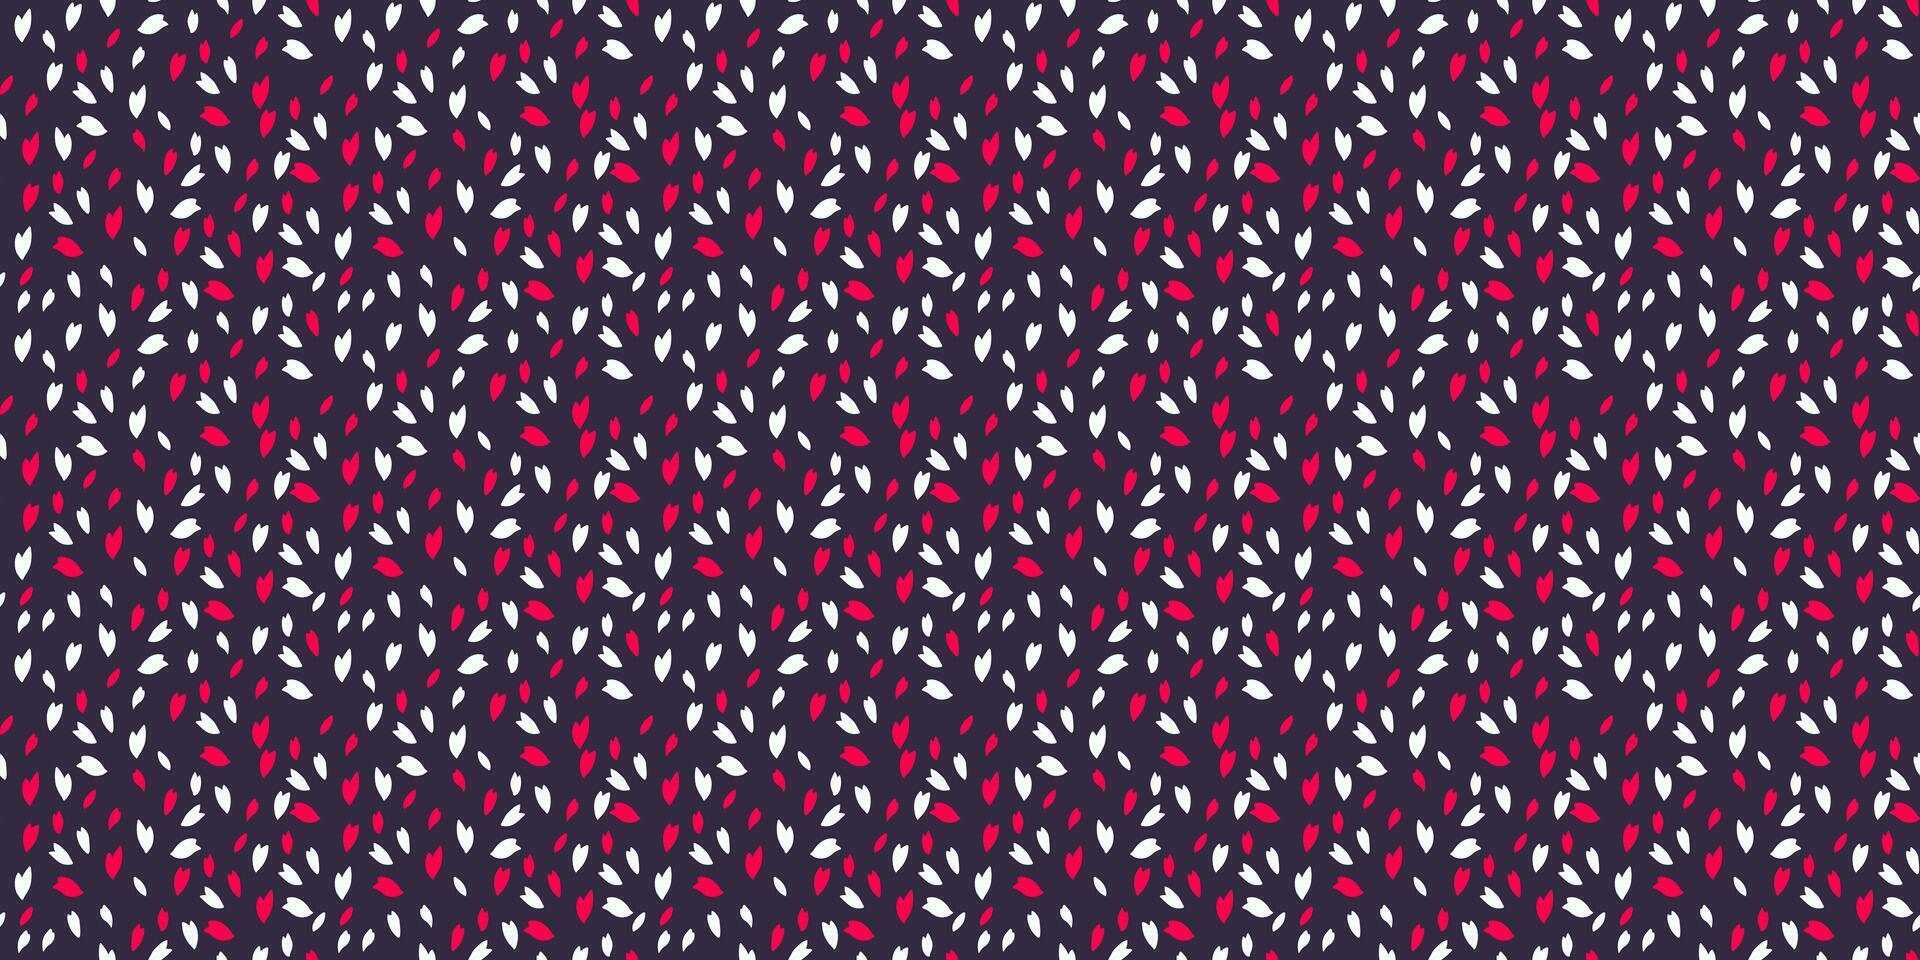 Colorful seamless pattern with red white polka dot on a dark black background. Vector hand drawn doodle sketch snowflakes, circles, leaflets. Random dots, shapes, drops, spots printing.